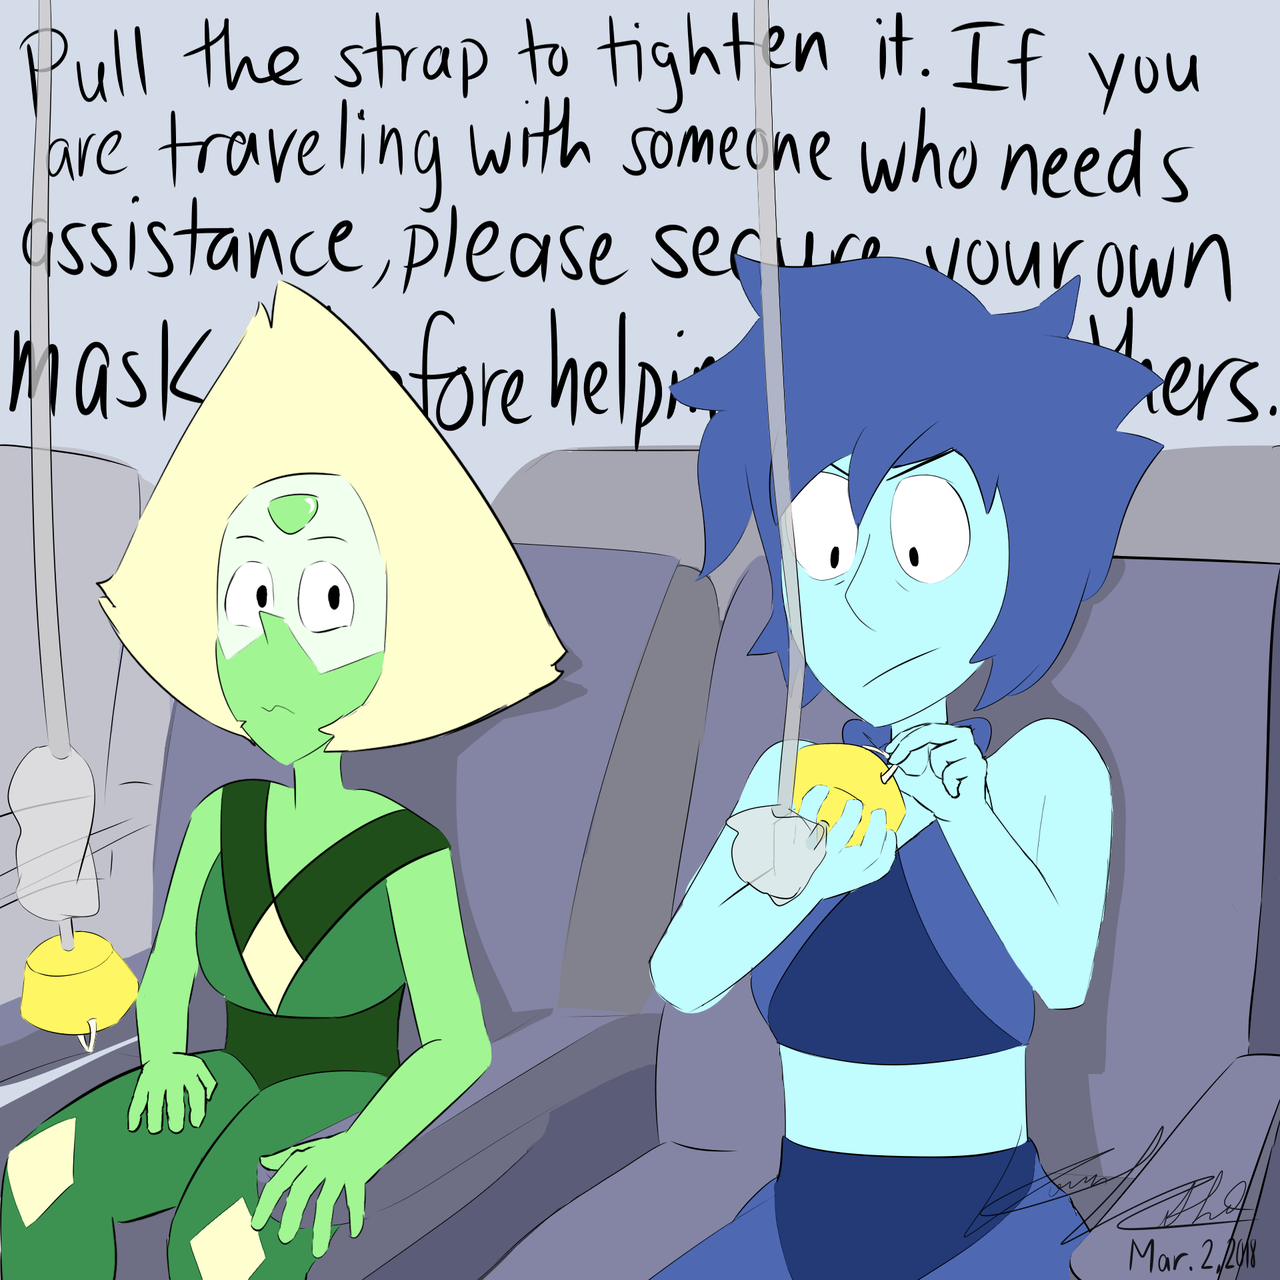 Lapis is just securing her mask first. Inspired by this week’s podcast.